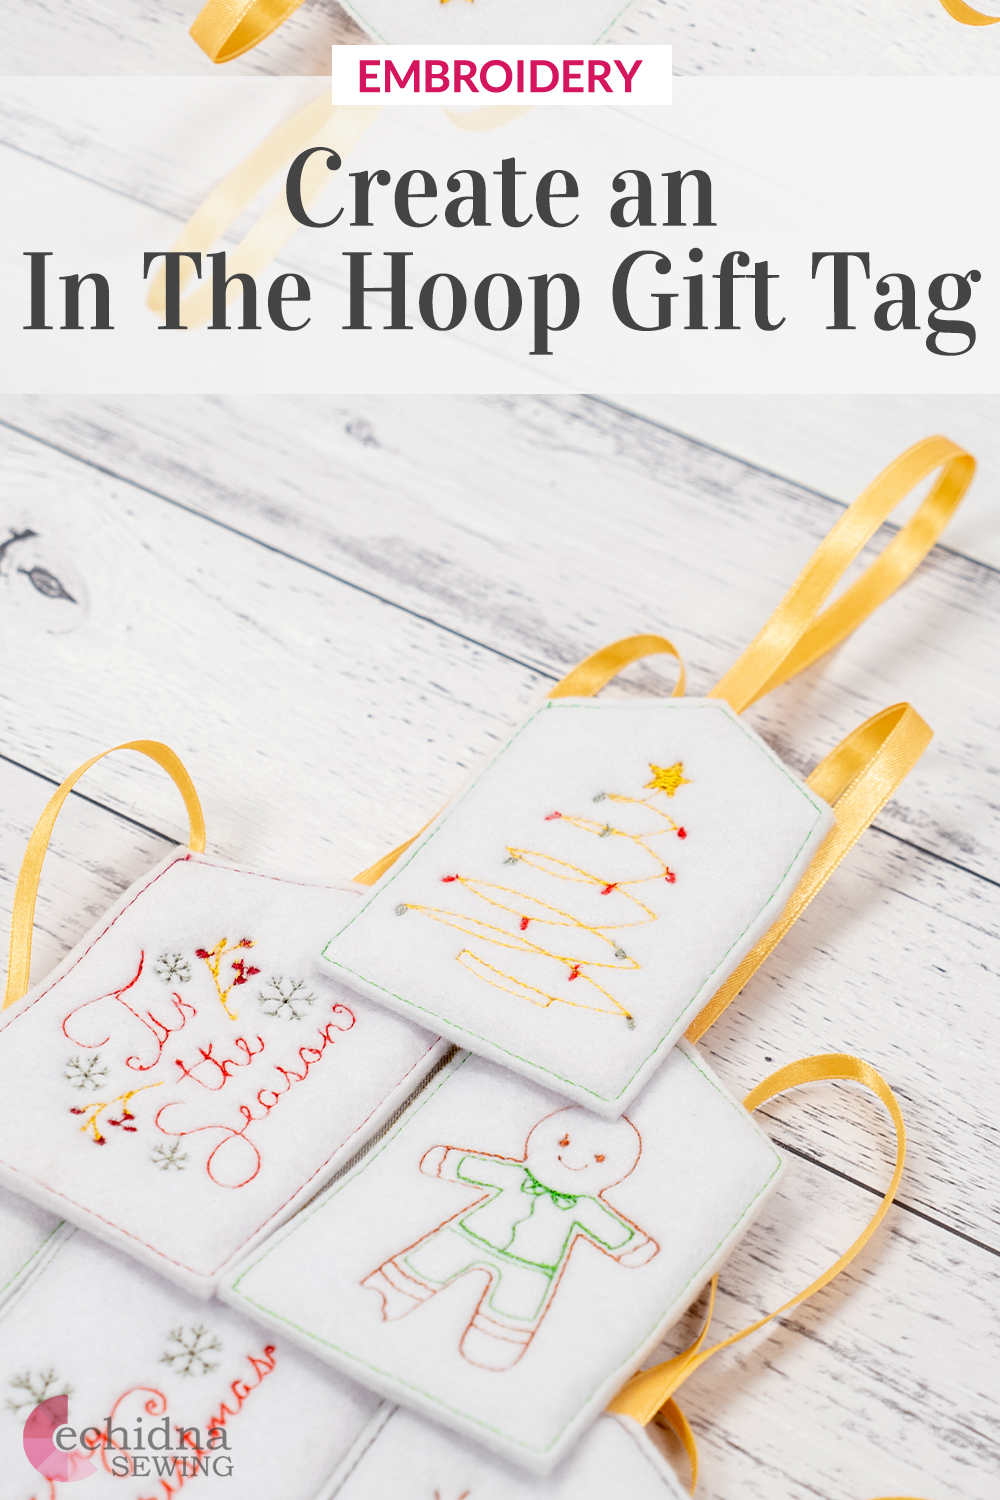 In-the-hoop Gift Tag Project Pinterest